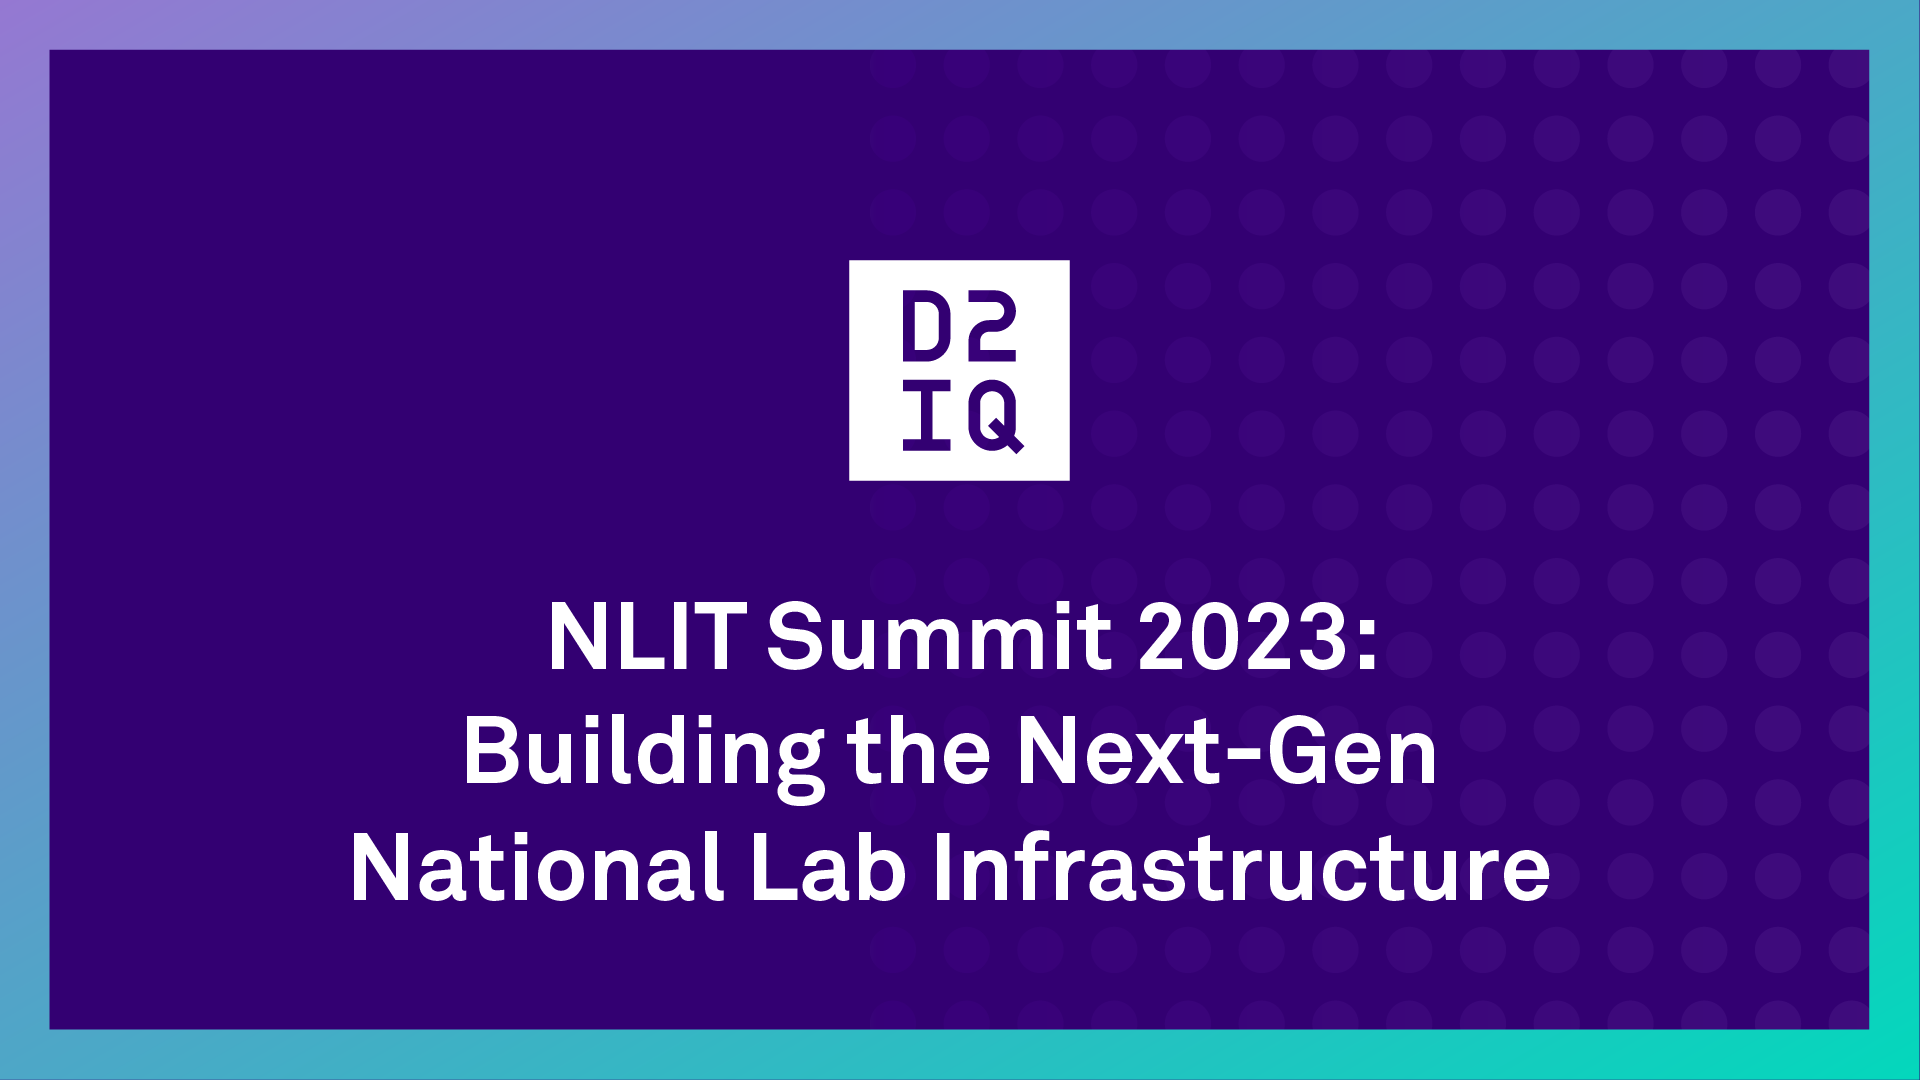 Building the Next-Gen National Lab Infrastructure